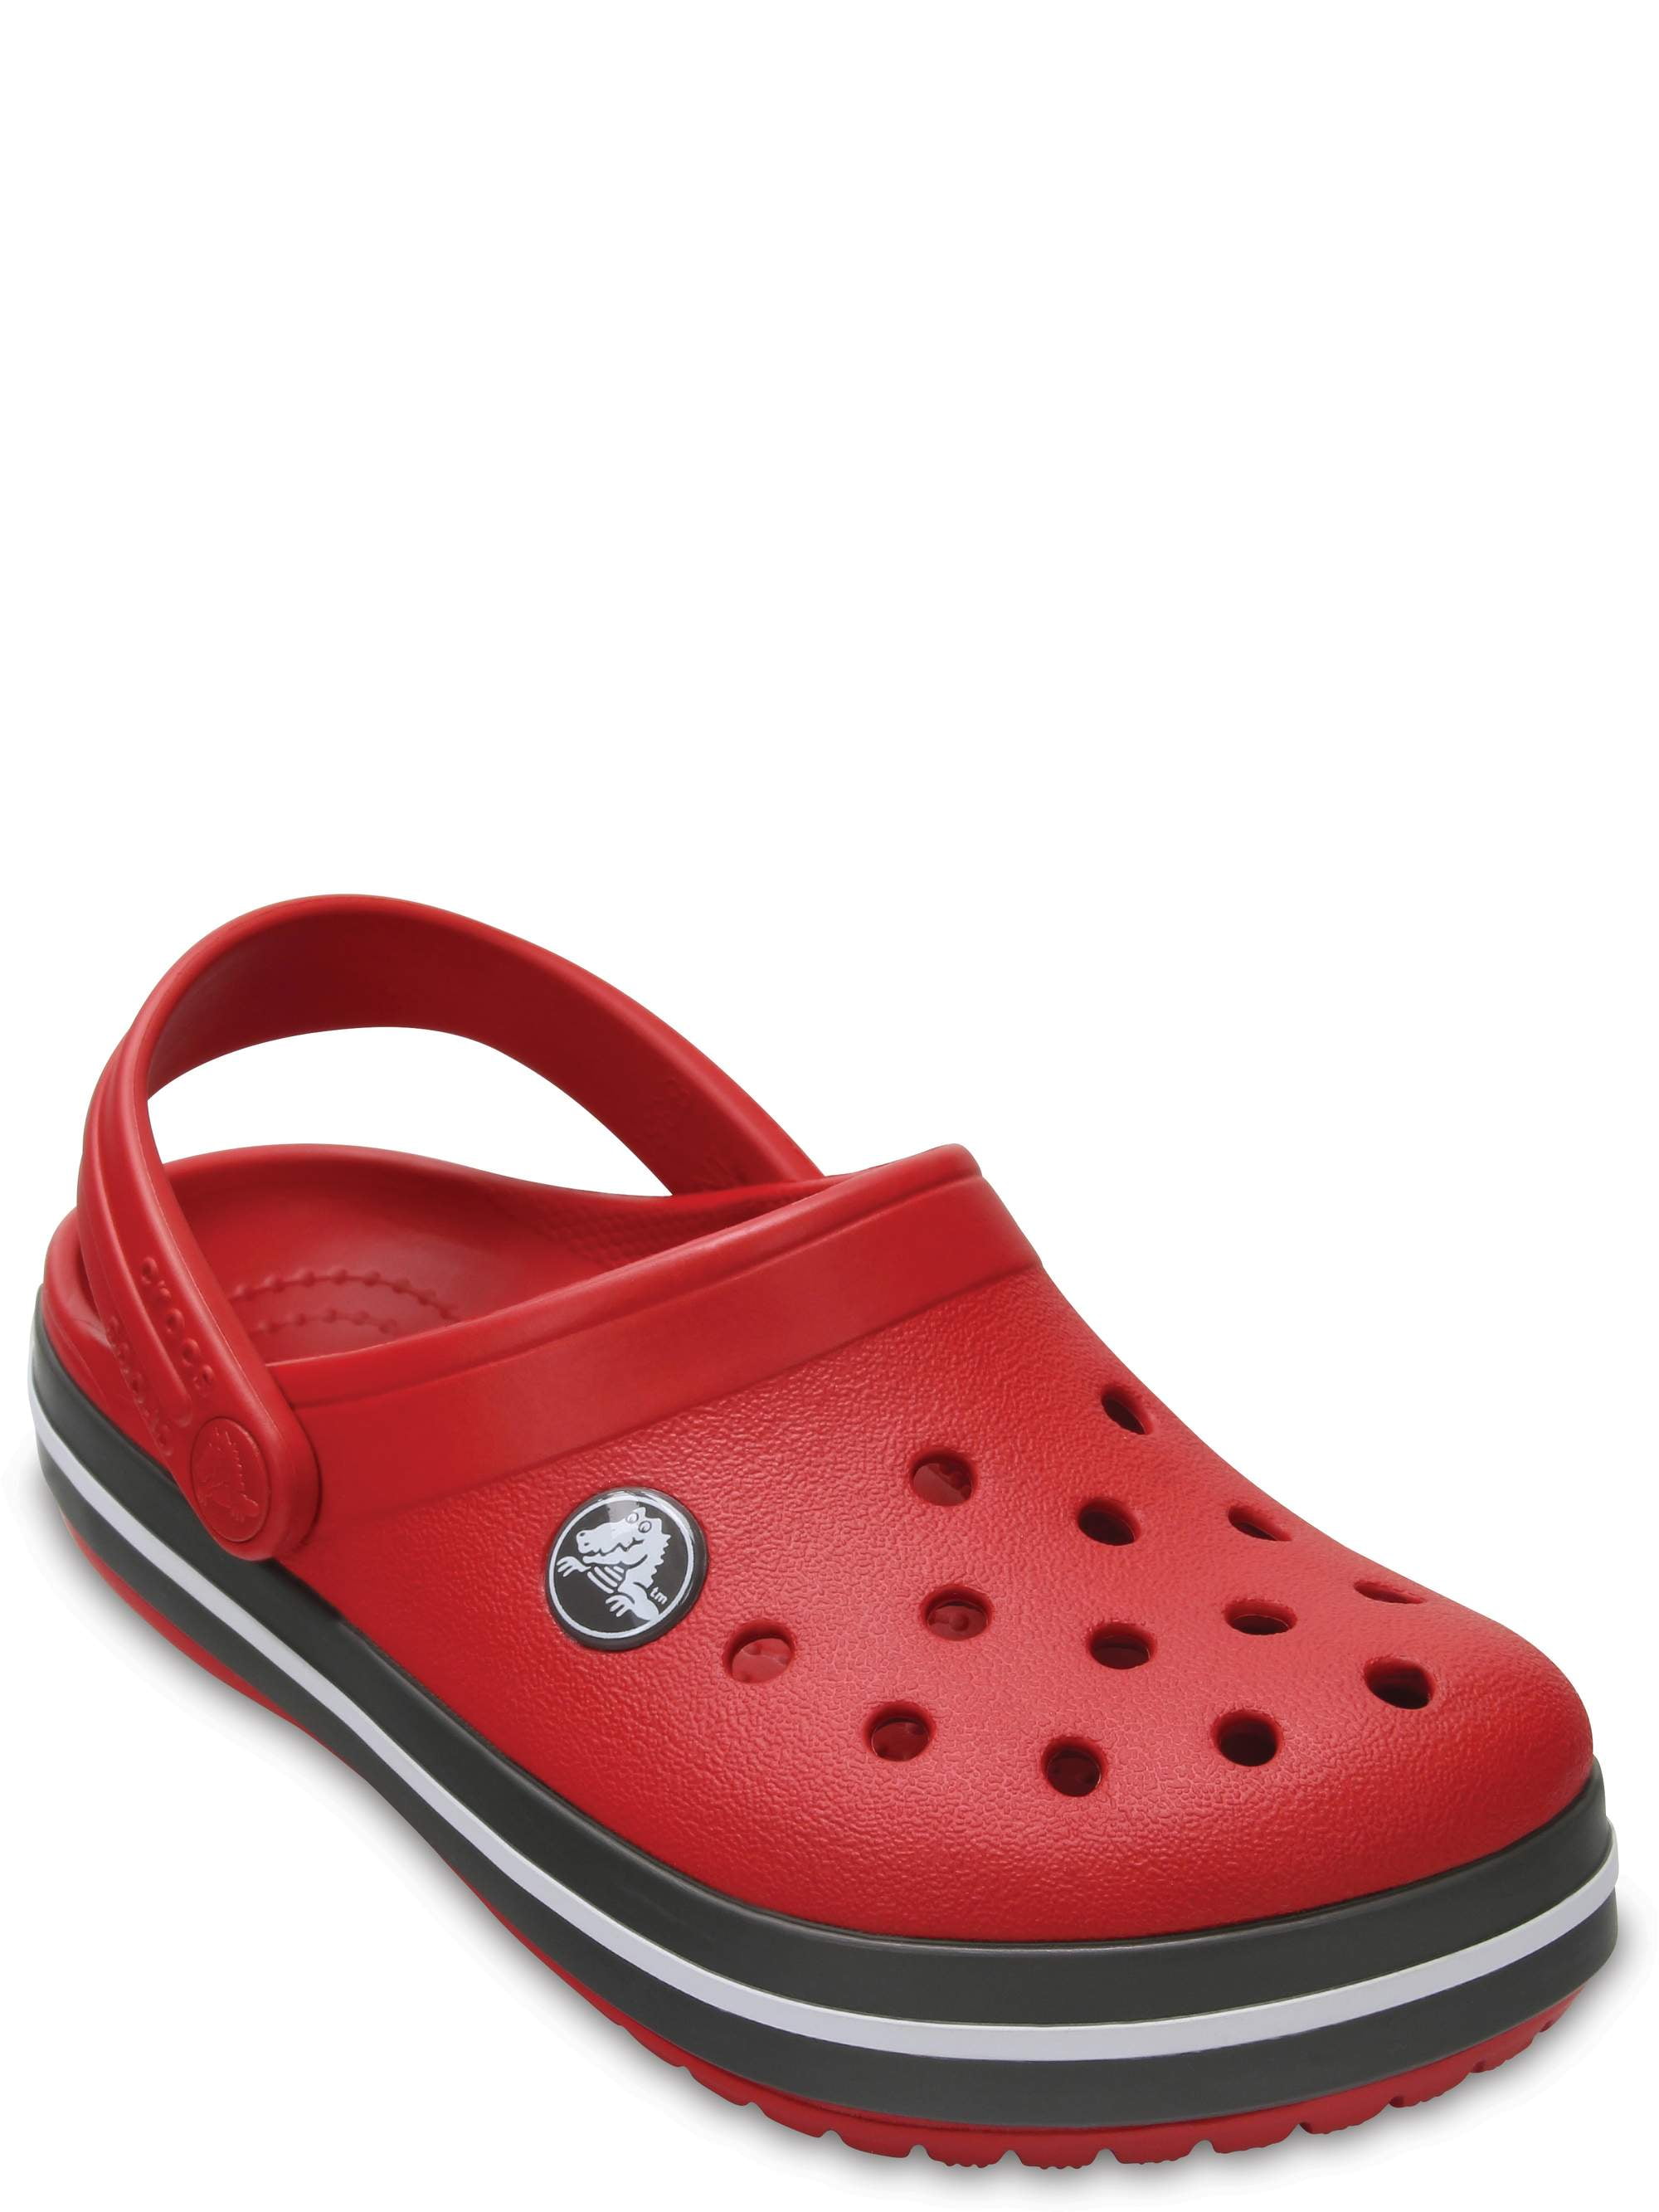 crocs in red